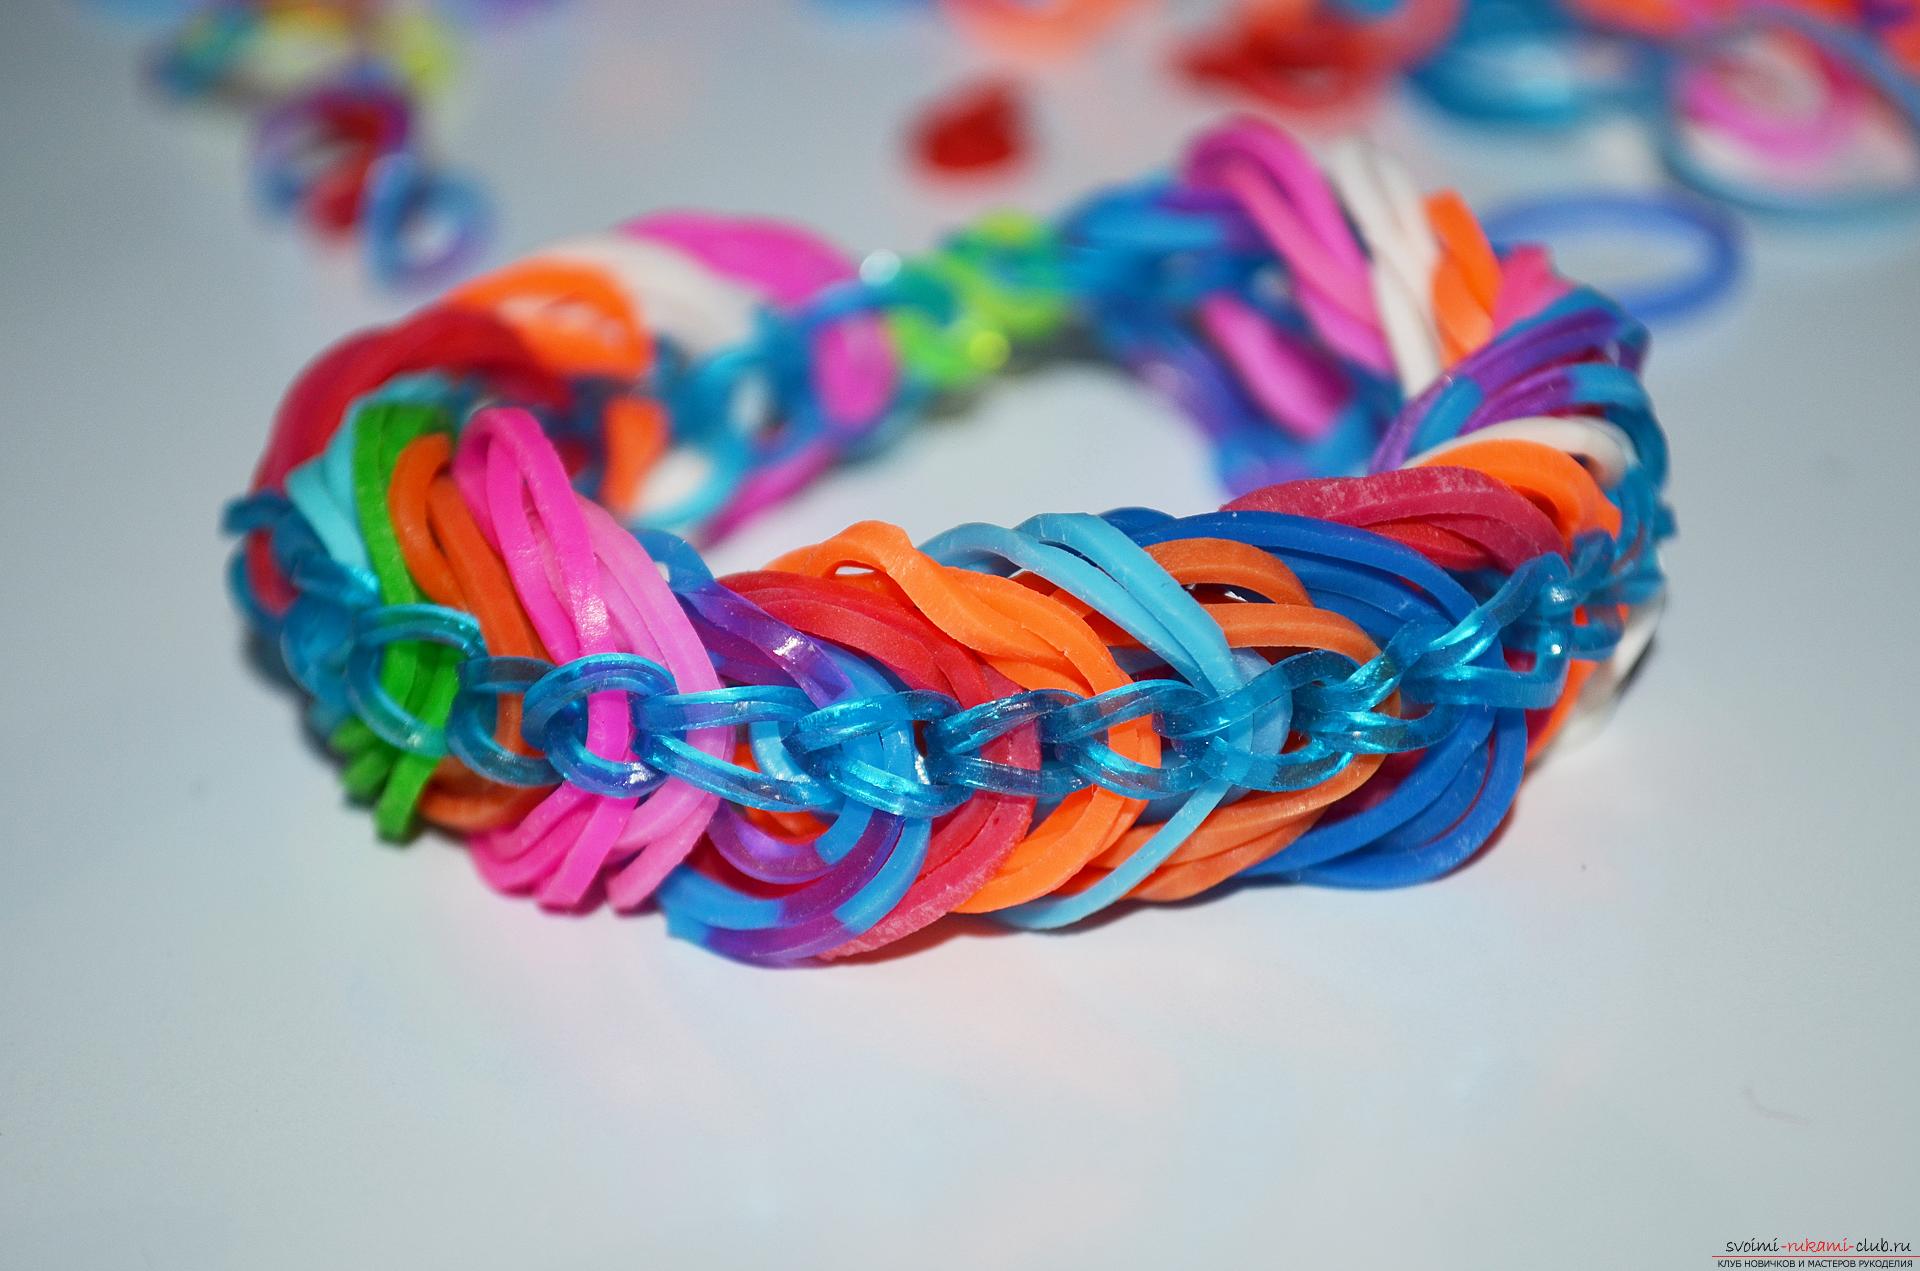 Photo for a lesson on braiding from a rubber band of a bracelet 